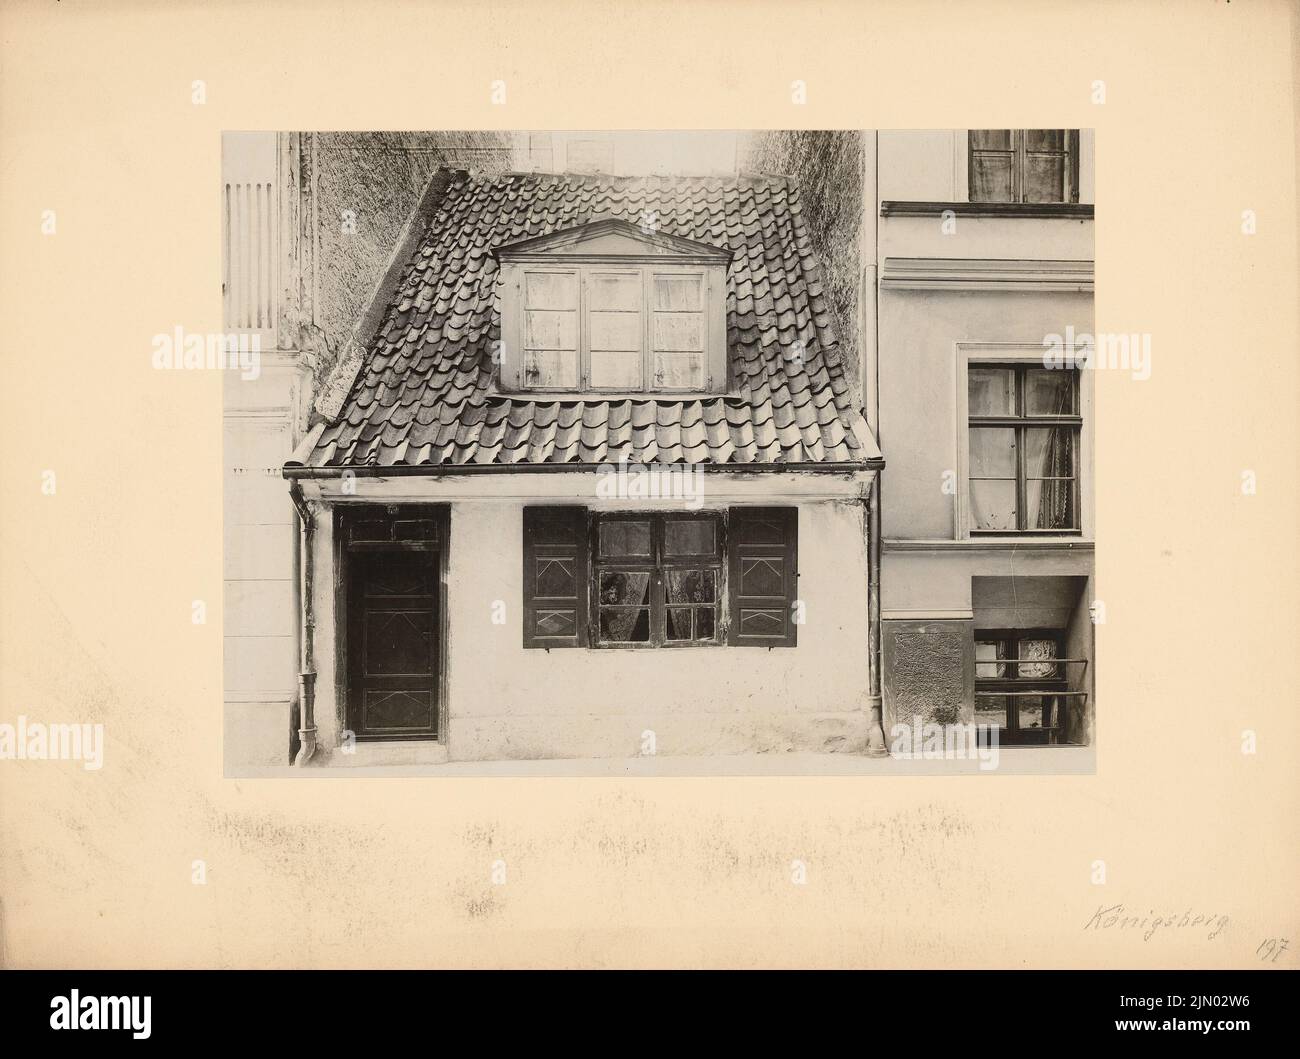 Unknown photographer, 1-storey house in Königsberg (without dat.): View. Photo on cardboard, 24.8 x 33.3 cm (including scan edges) N.N. : 1-geschossiges Wohnhaus, Königsberg Stock Photo